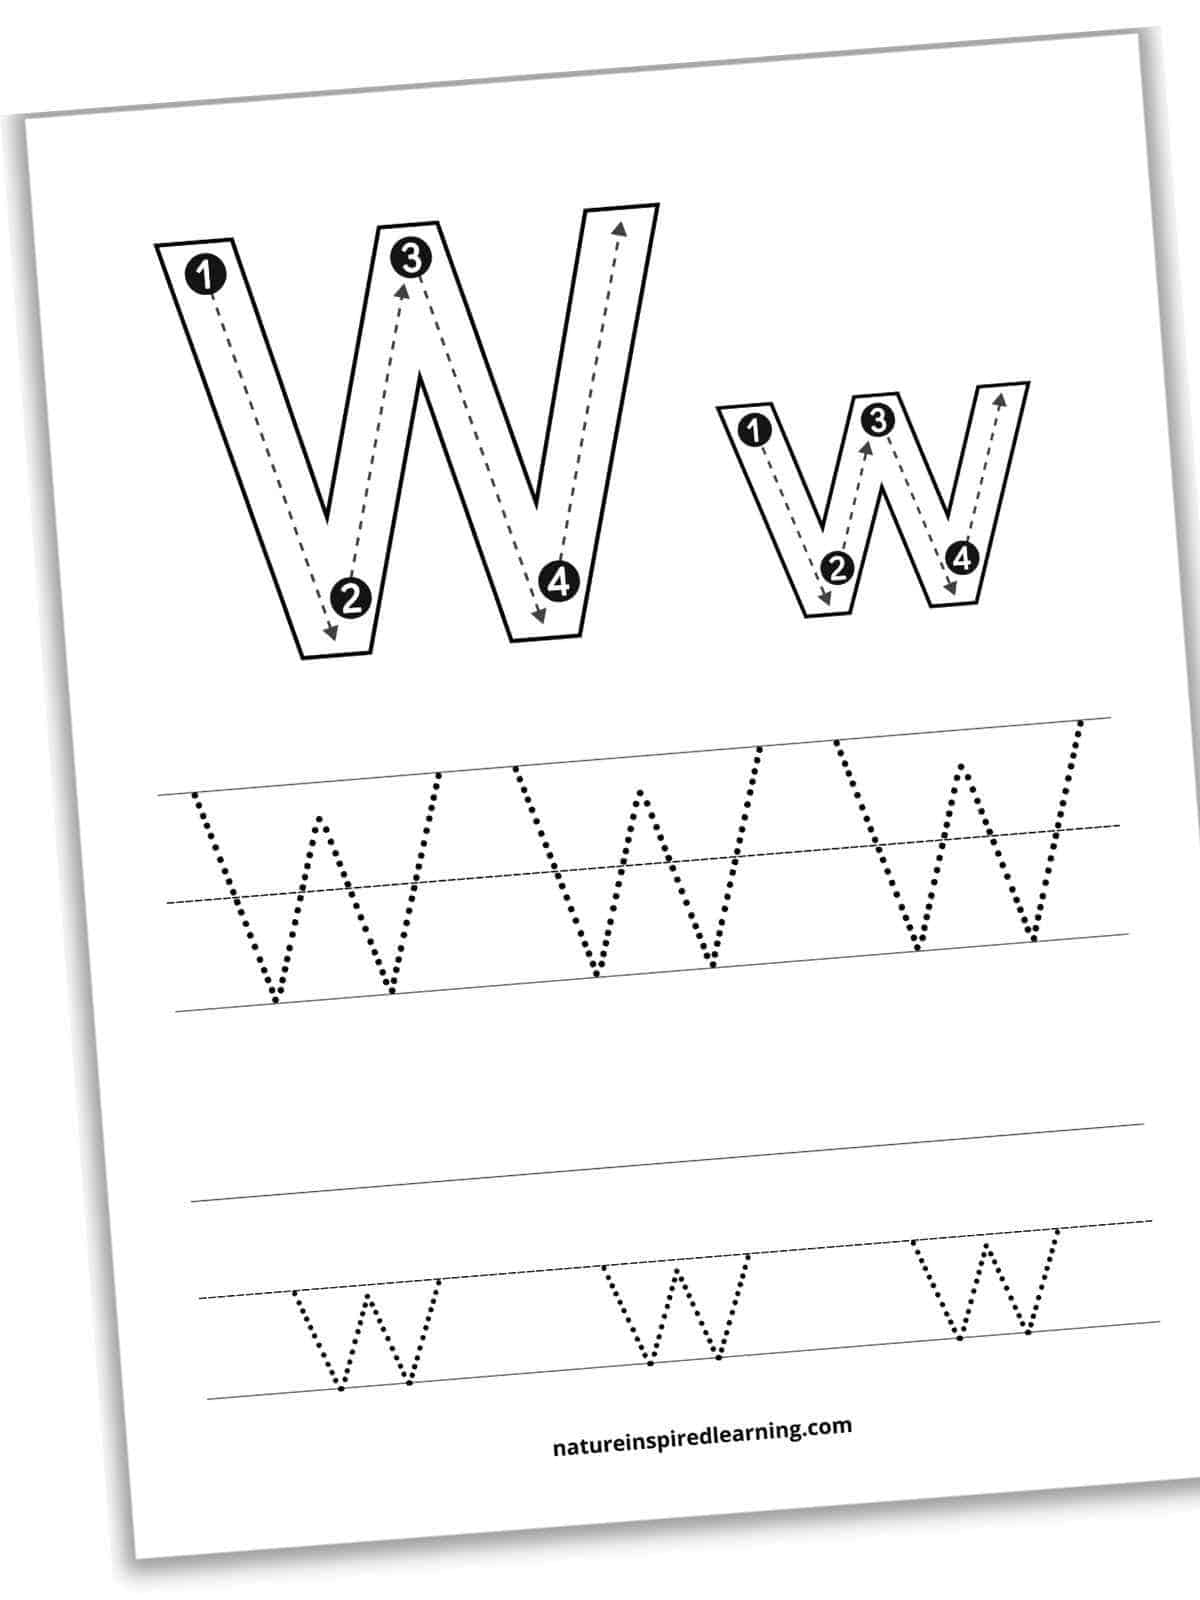 worksheet with large W w outlines with numbers, arrows, and dashed within each letter above two sets of lines with dotted letter W and w's